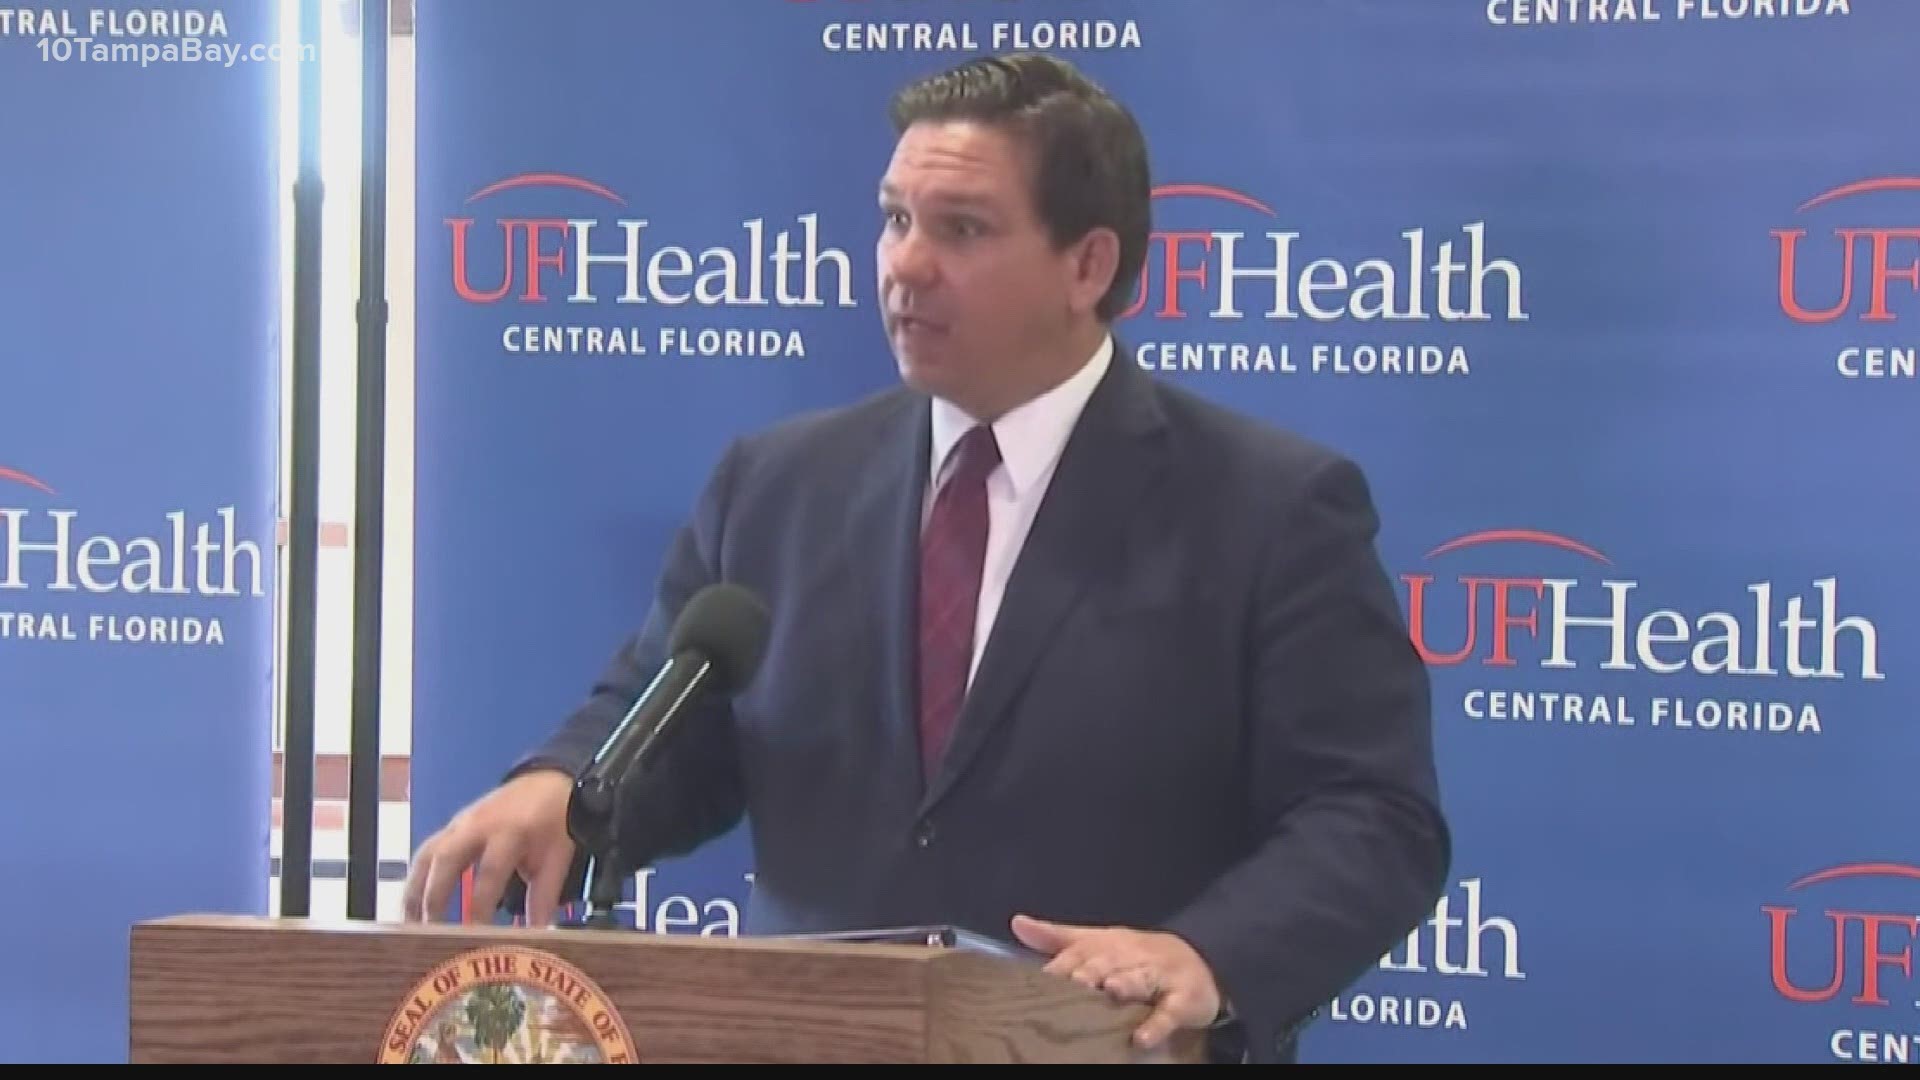 DeSantis made it clear, the CDC guideline is only a recommendation, and he doesn’t plan to follow it.